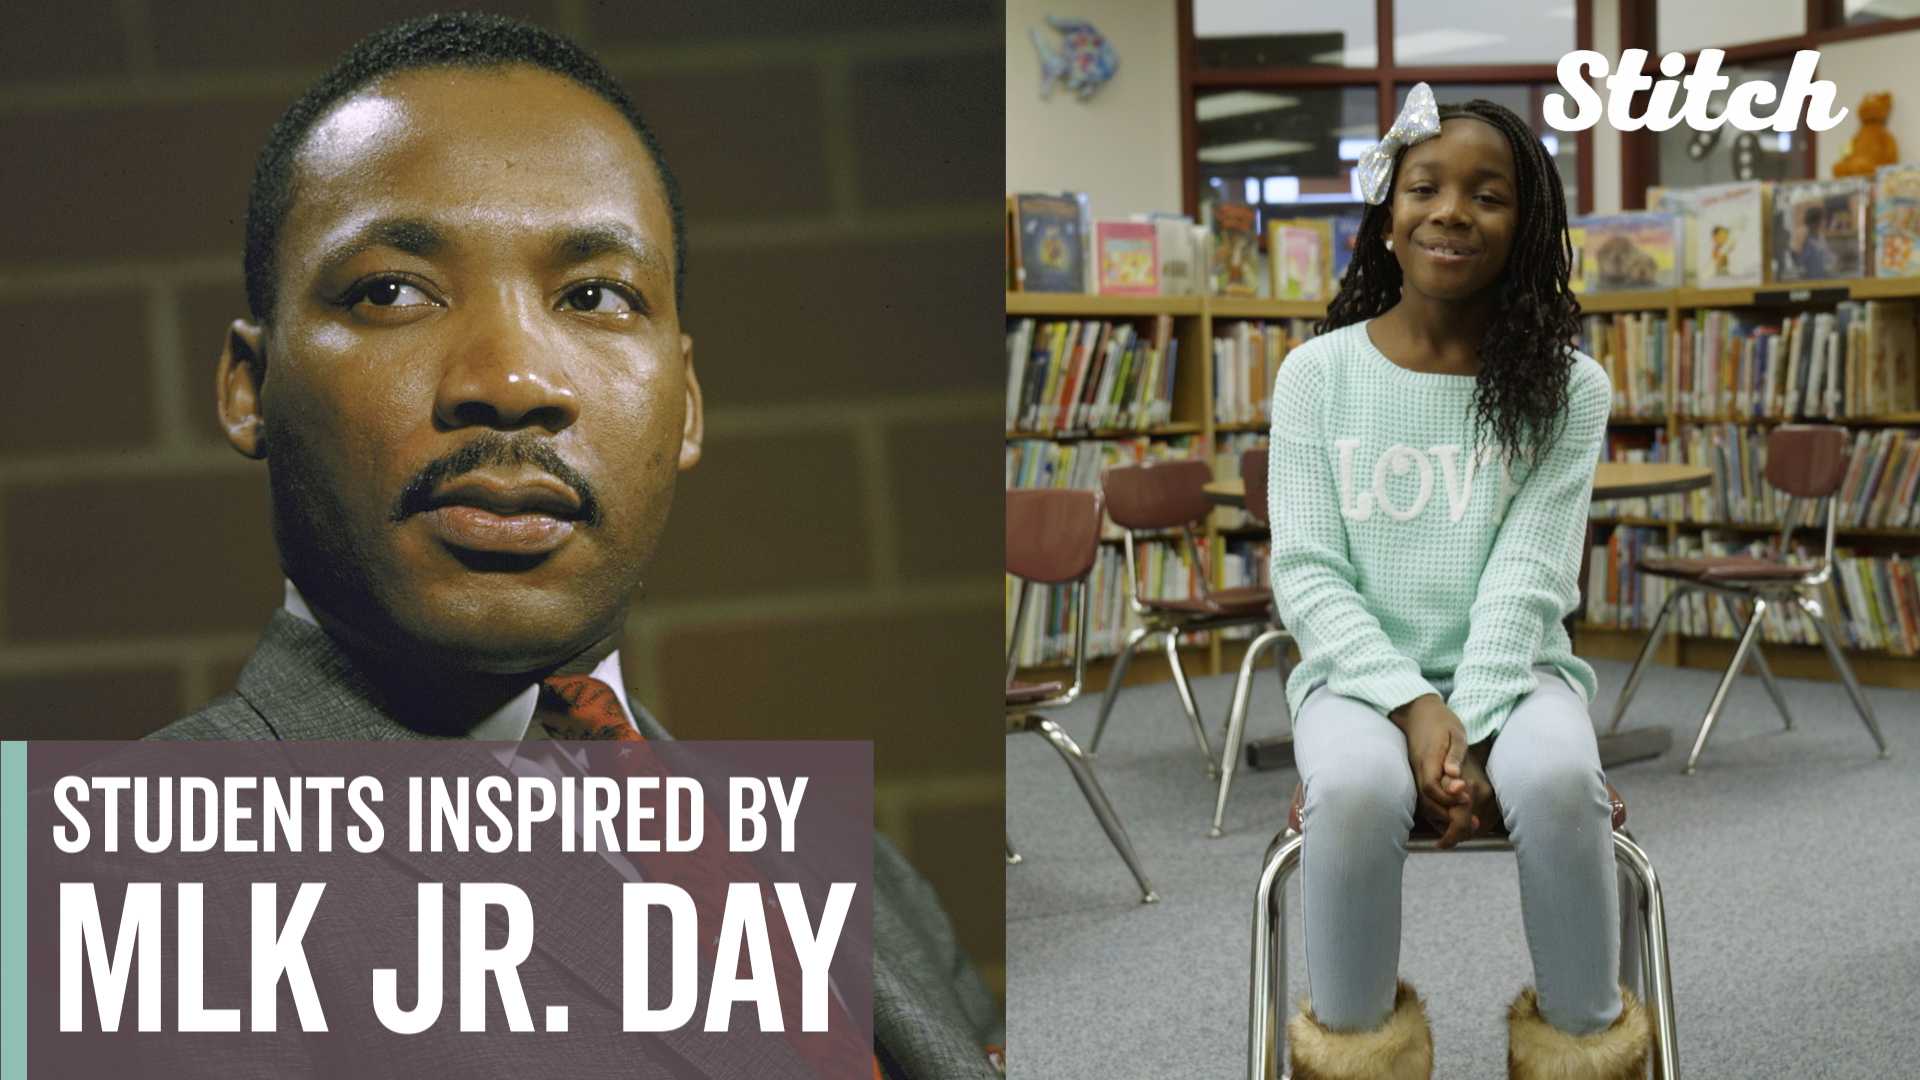 Fourth graders tell how Martin Luther King Jr. touches their lives